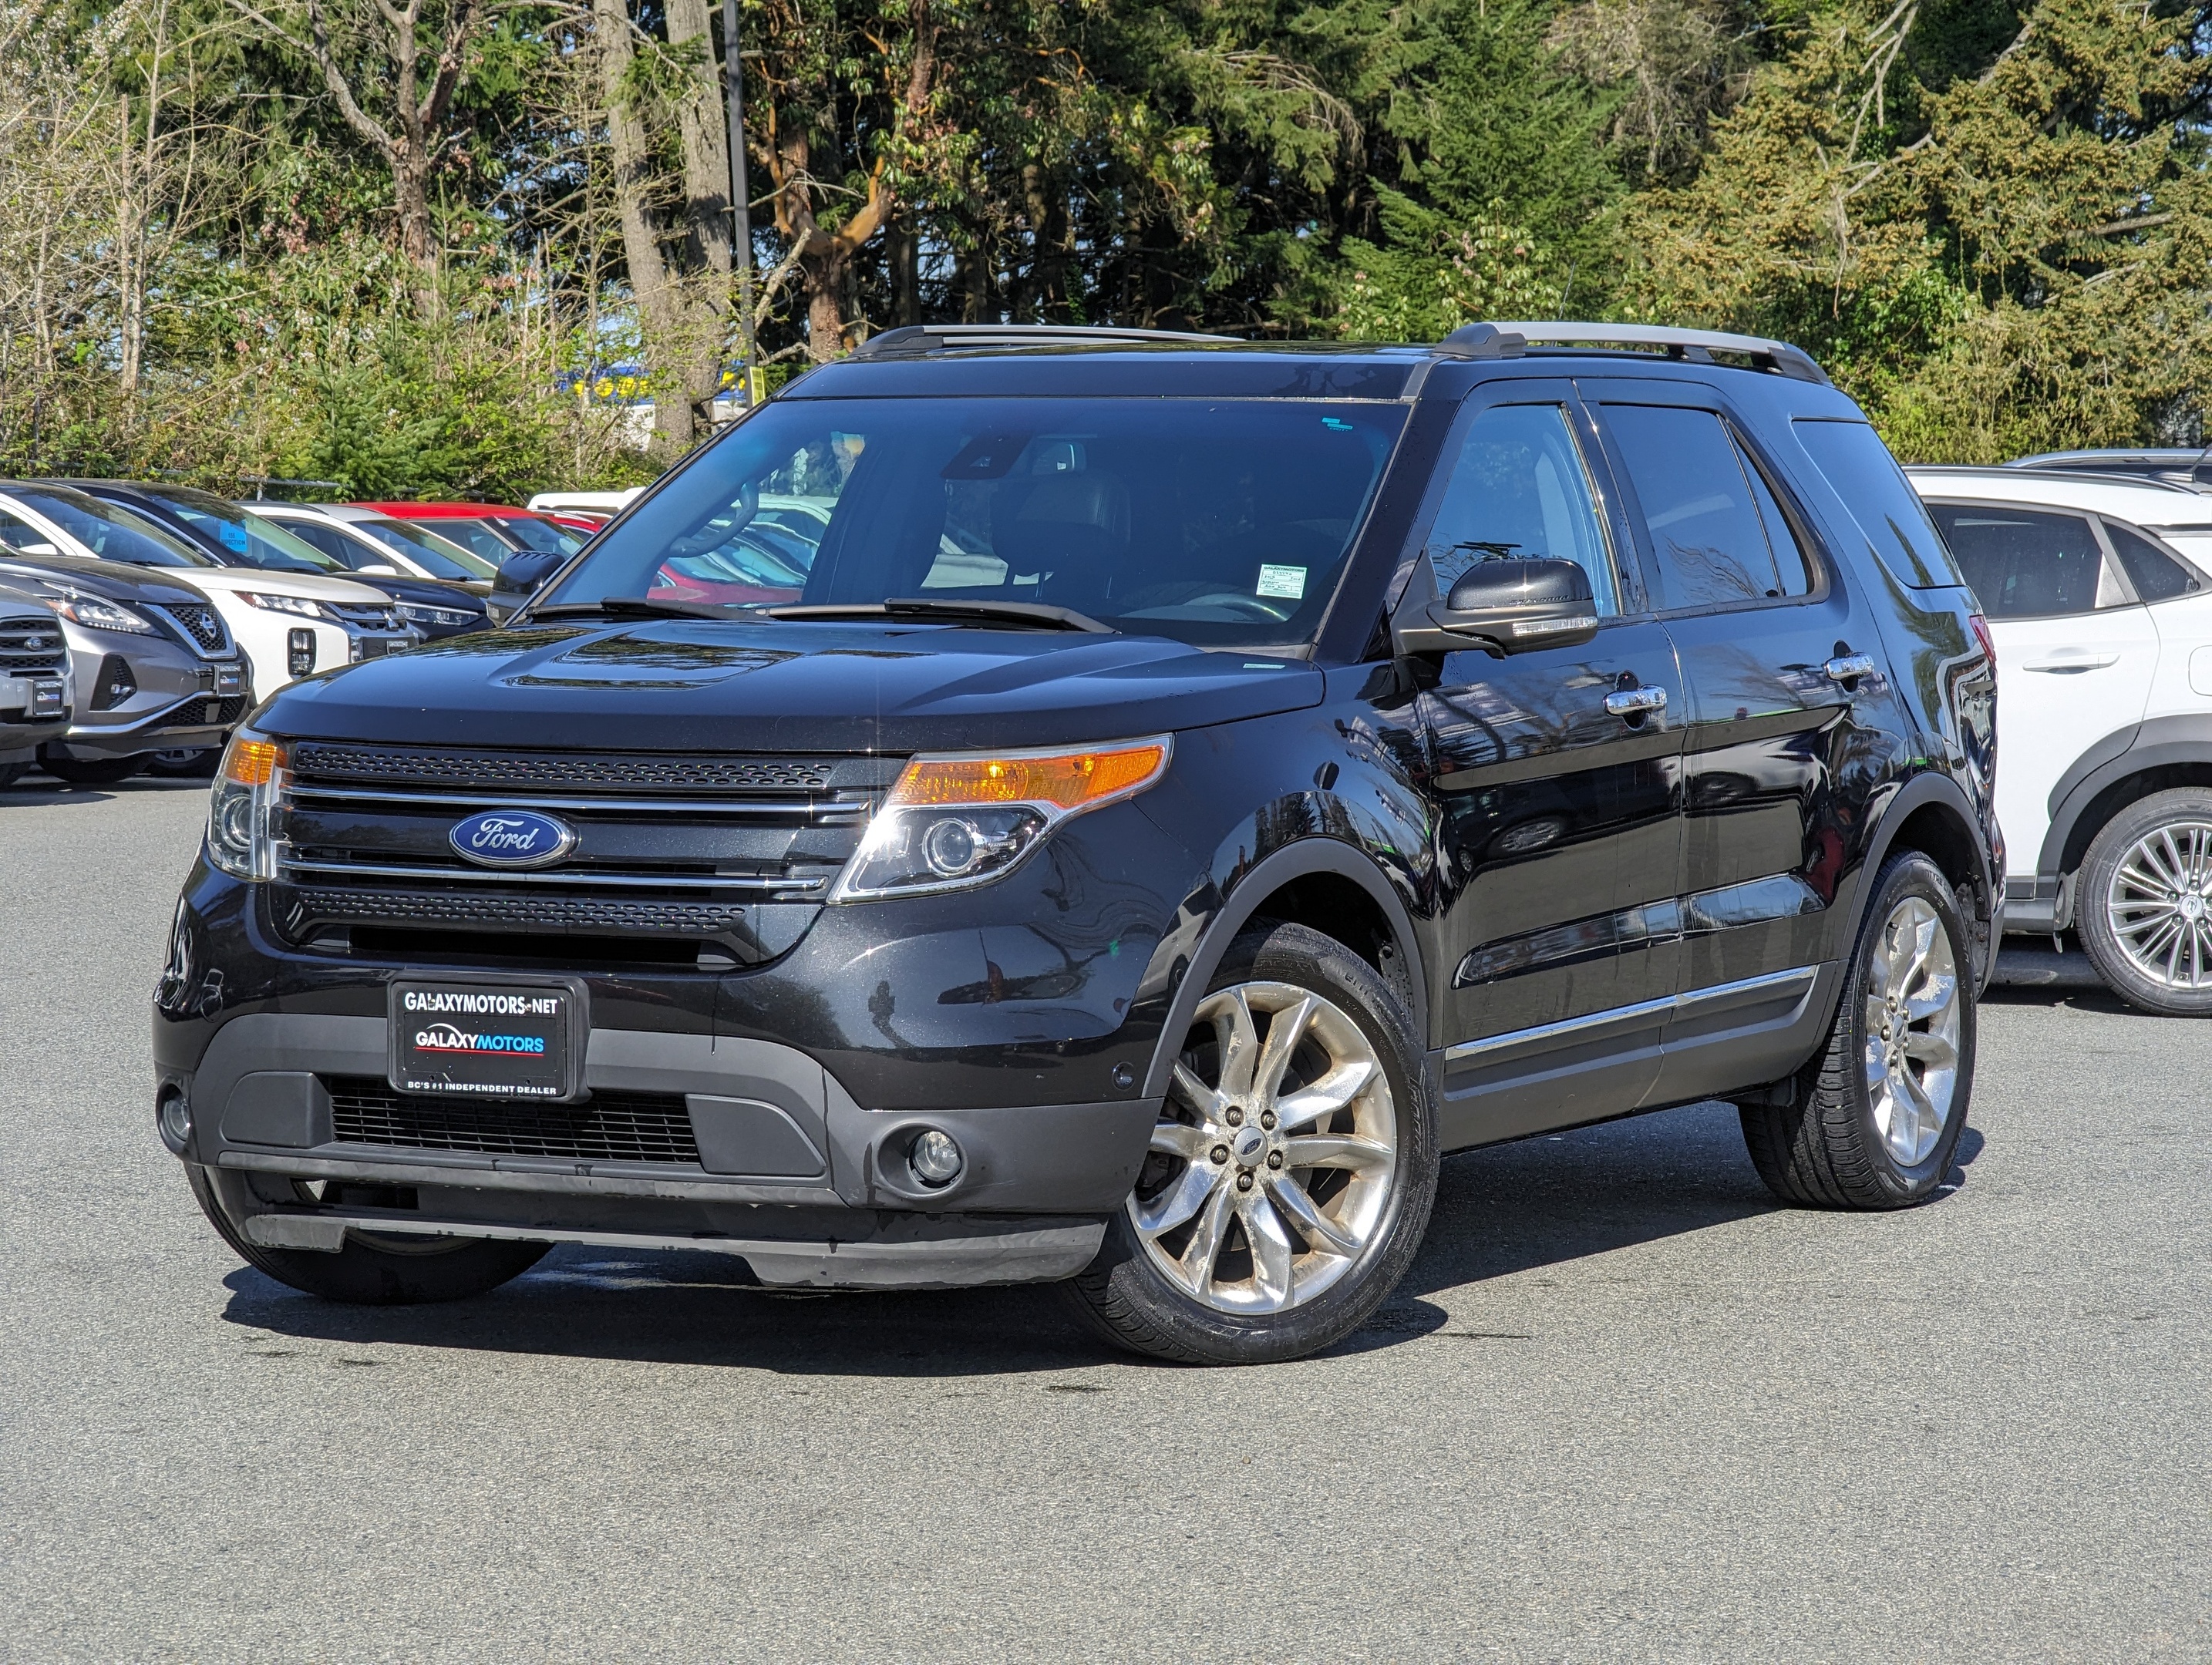 2015 Ford Explorer Limited - Heated/Vented Seats, Sunroof